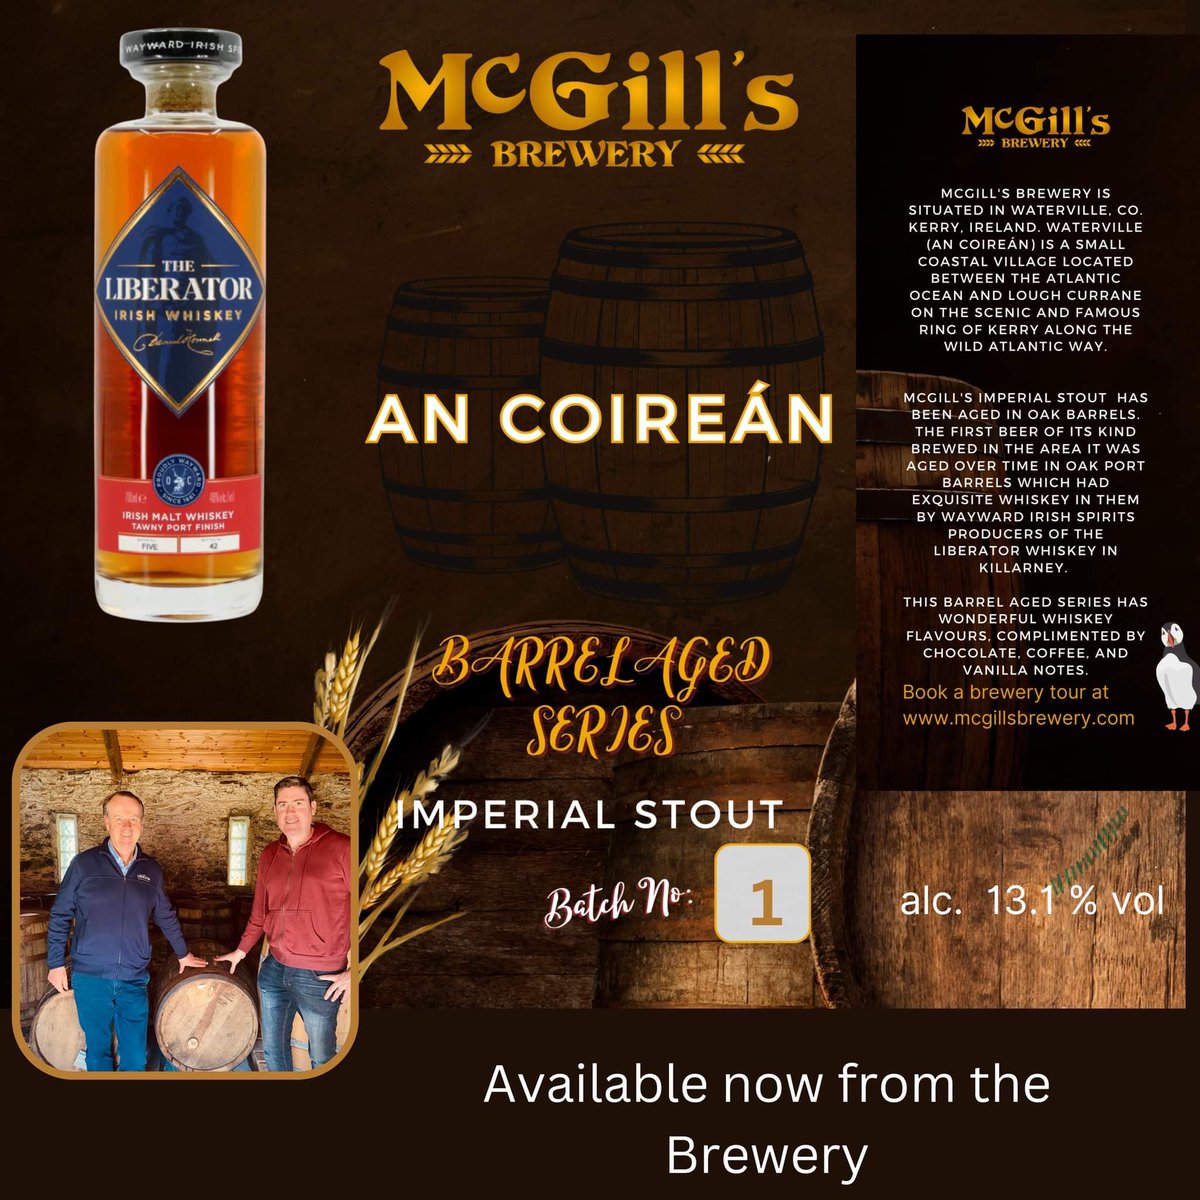 It's finally here!!! 'An Coireán' ('Waterville') Our Imperial Stout Aged over time at McGill's Brewery in @waywardirishspirits @theliberatorwhiskey Tawny Port Oak Barrels. The first of its kind in the area!! Available exclusively at the brewery 🍻🍻🍻#barrelaged #barrelagedbeer